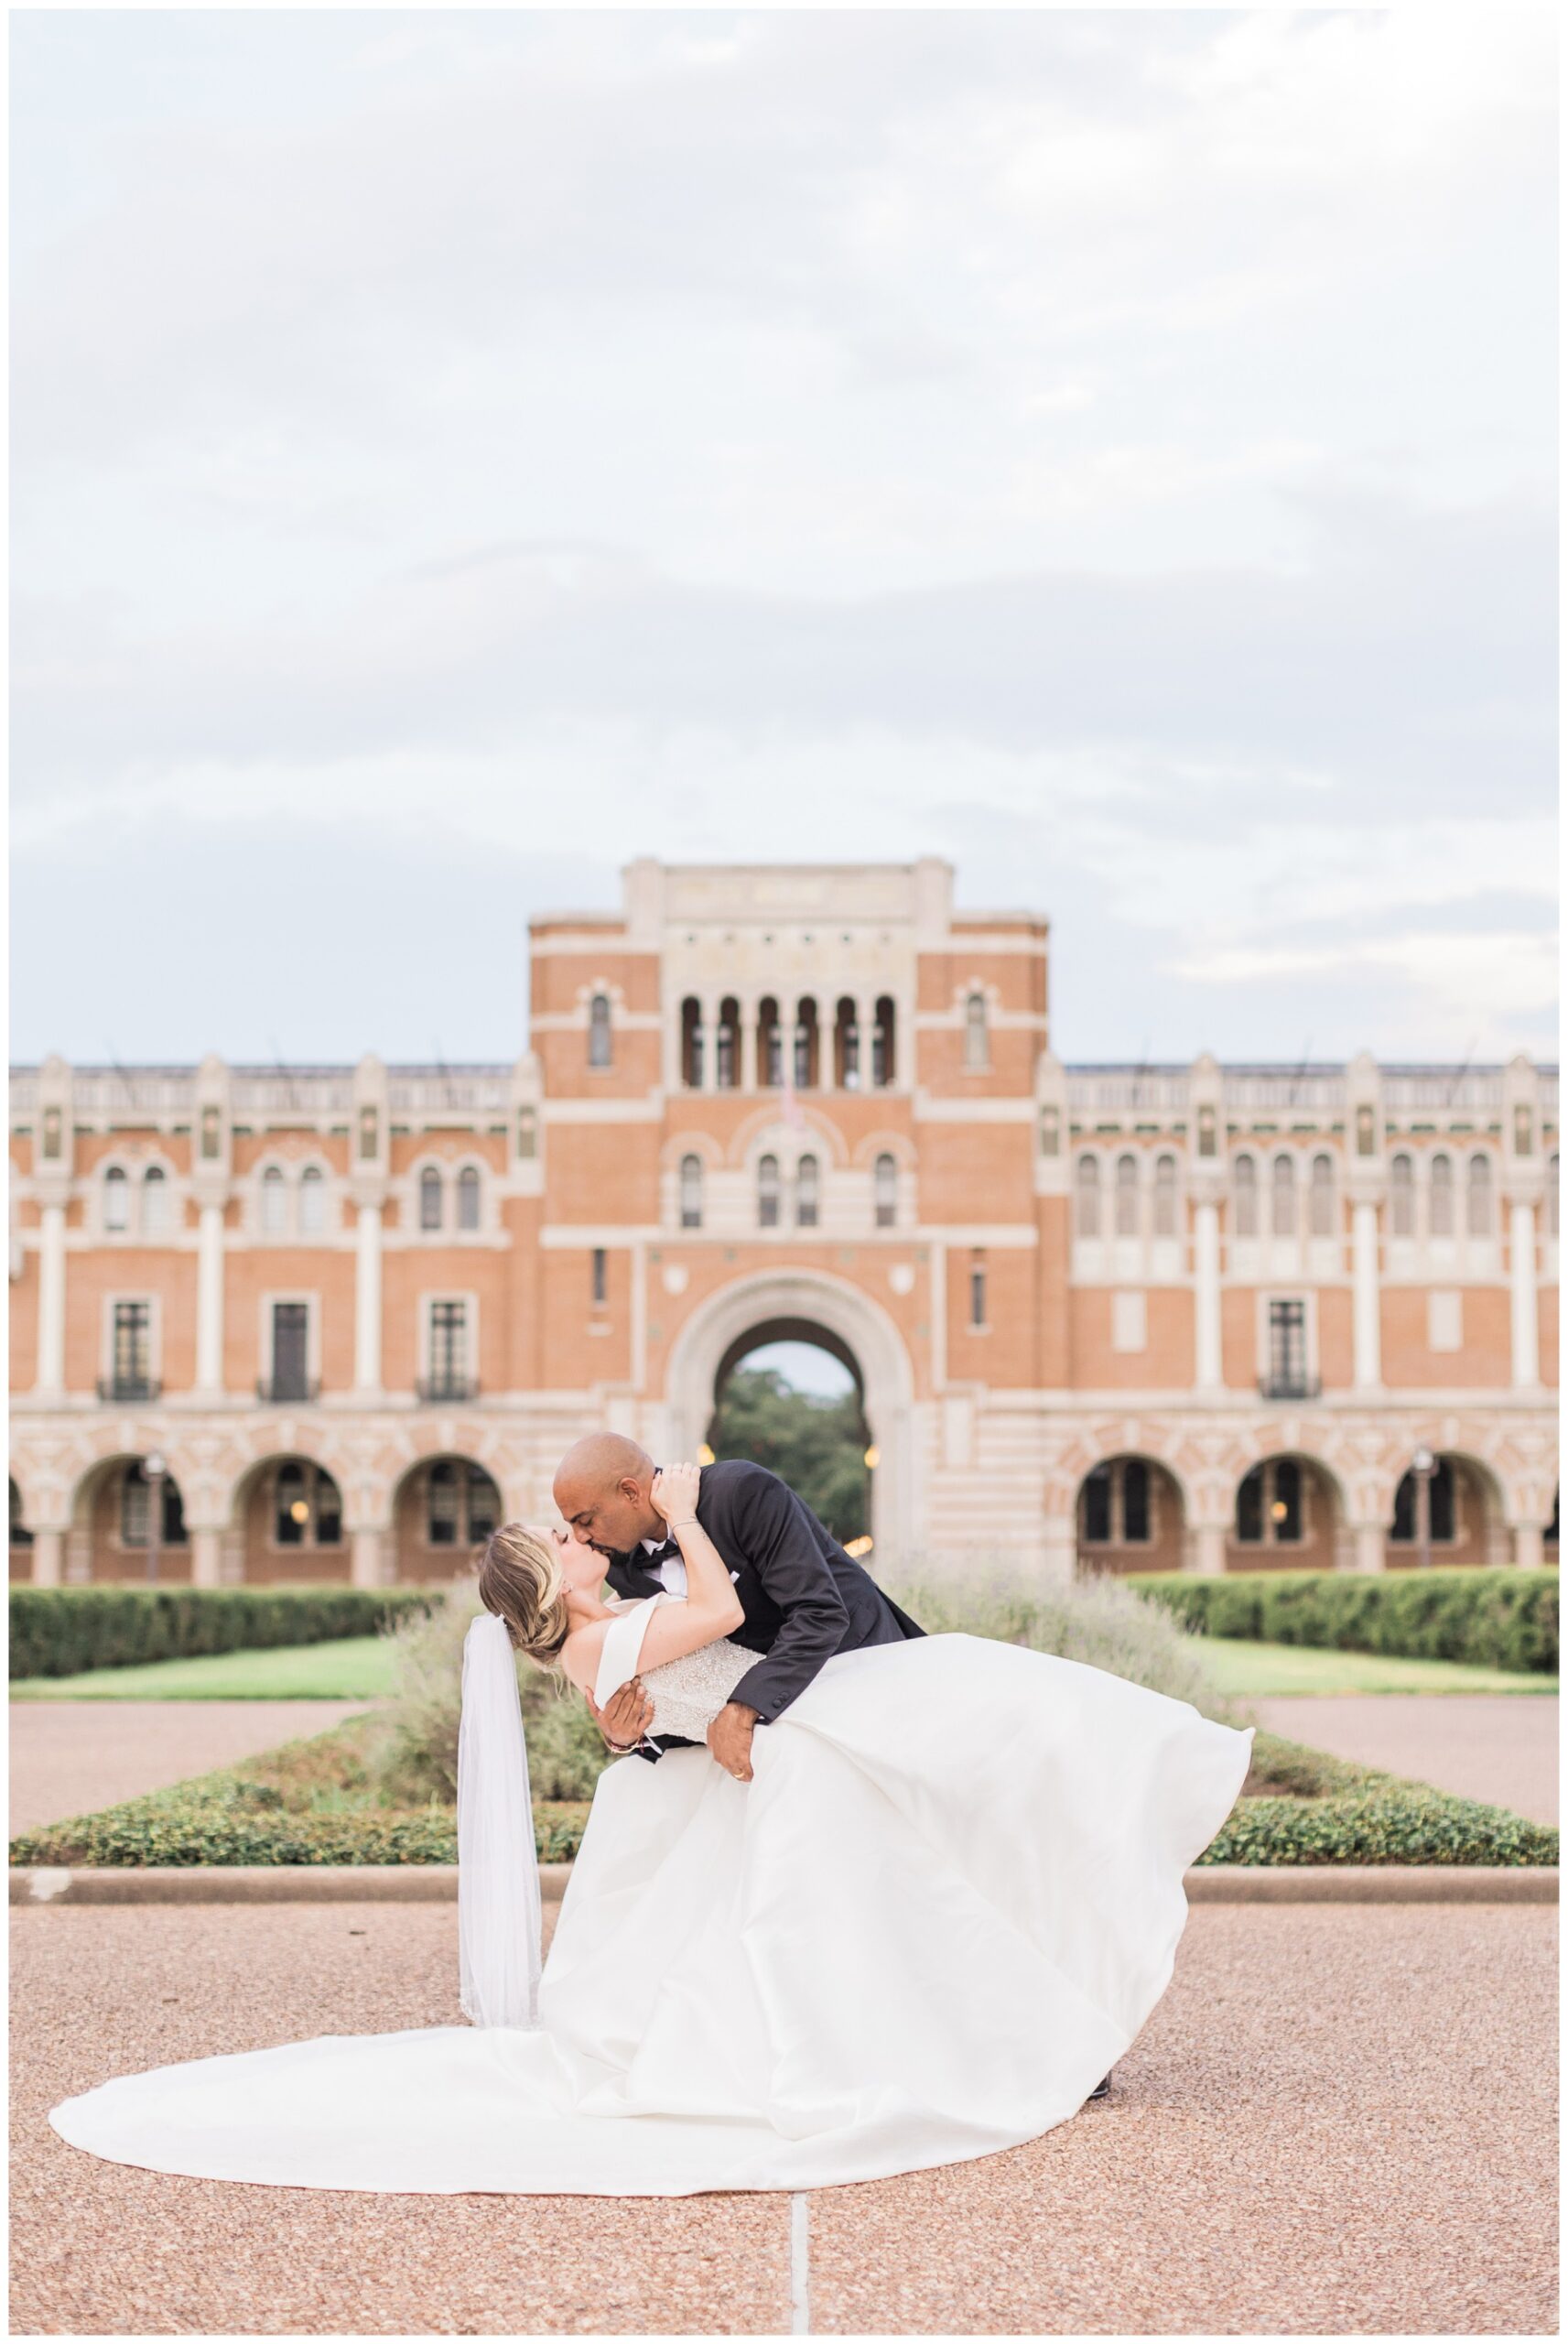 Bride and groom kissing in front of Lovett Hall at Rice University